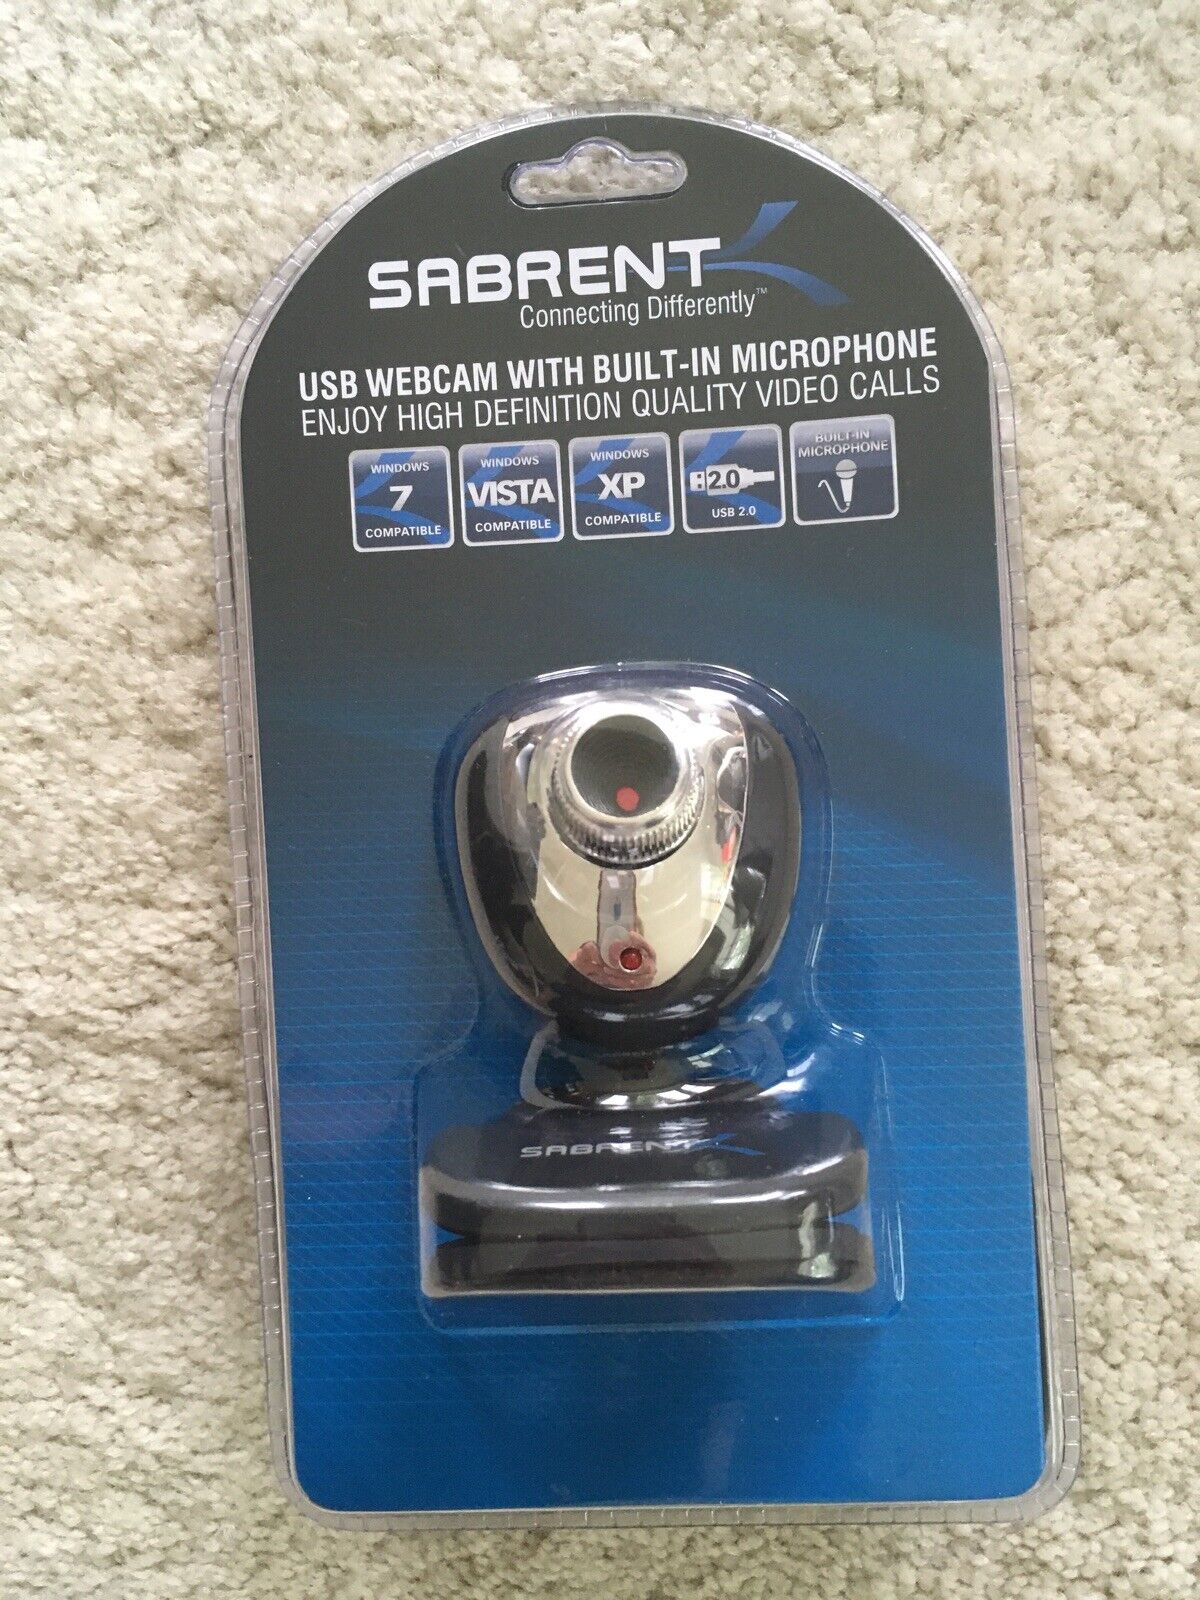 SABRENT SBT-WCCK USB 2.0 USB Color Web Camera with Built-in Audio Microphone NIP